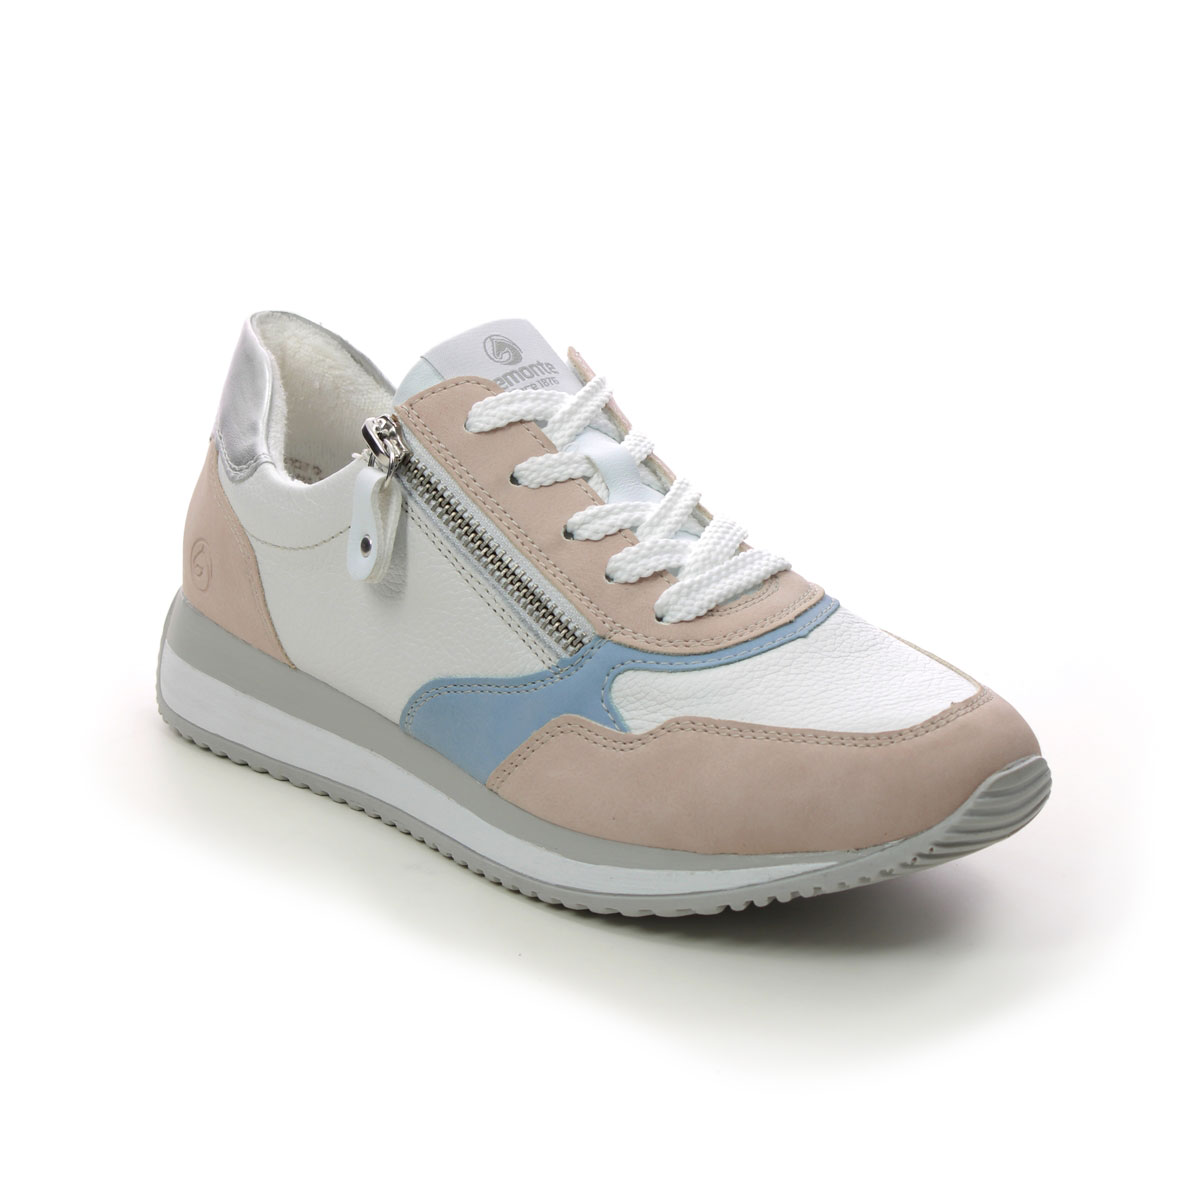 Remonte Vapod Zip White Blue Pink Womens Trainers D0H01-80 In Size 38 In Plain White Blue Pink